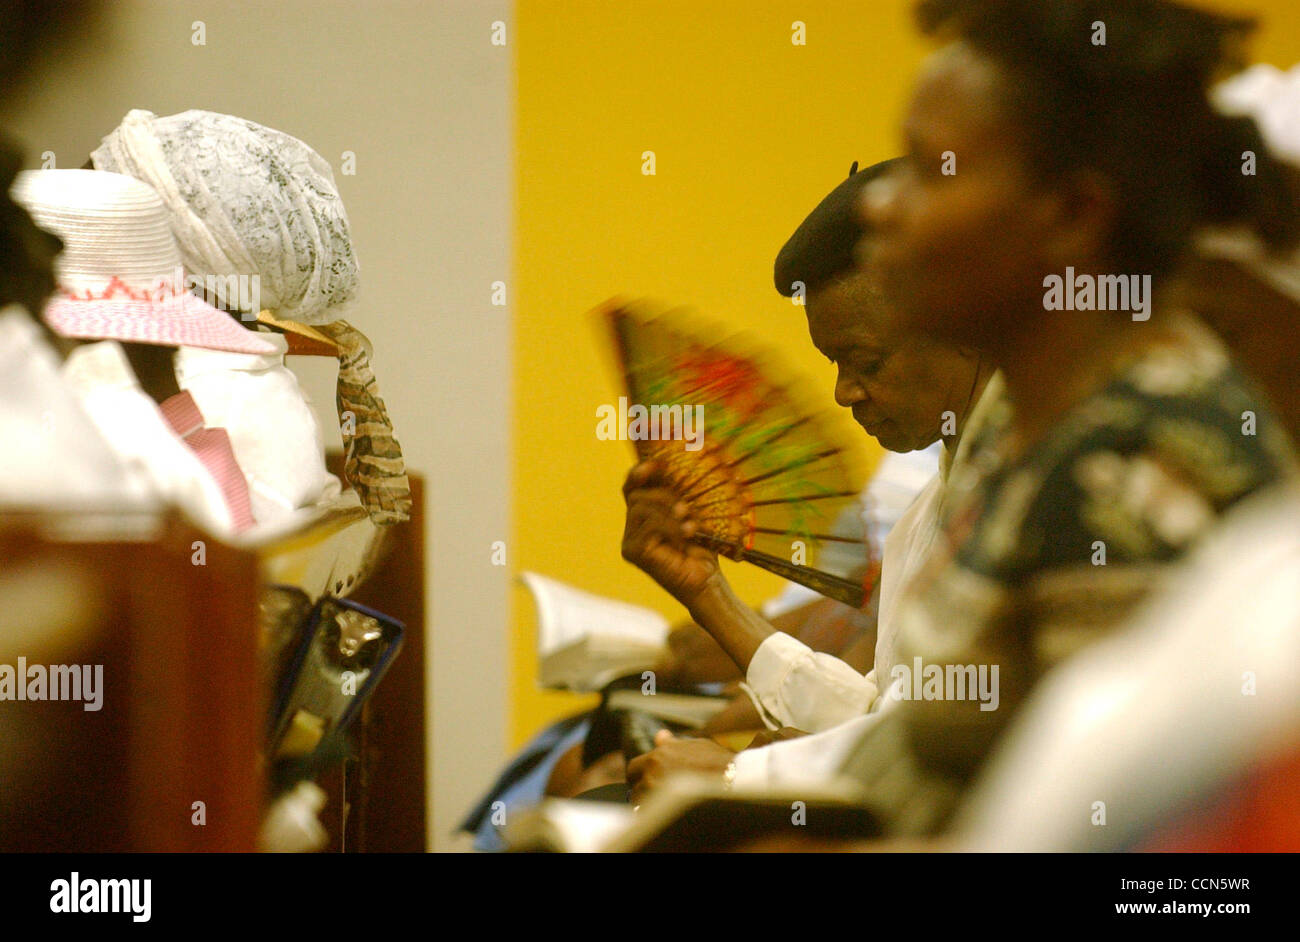 Aug 17, 2004; Miami, FL, USA; A Haitian woman fans herself during a revival service at the Haitian Baptist Church of the Living God in the Little Haiti neighborhood of Miami, FL on Tuesday, August 17, 2004. Stock Photo